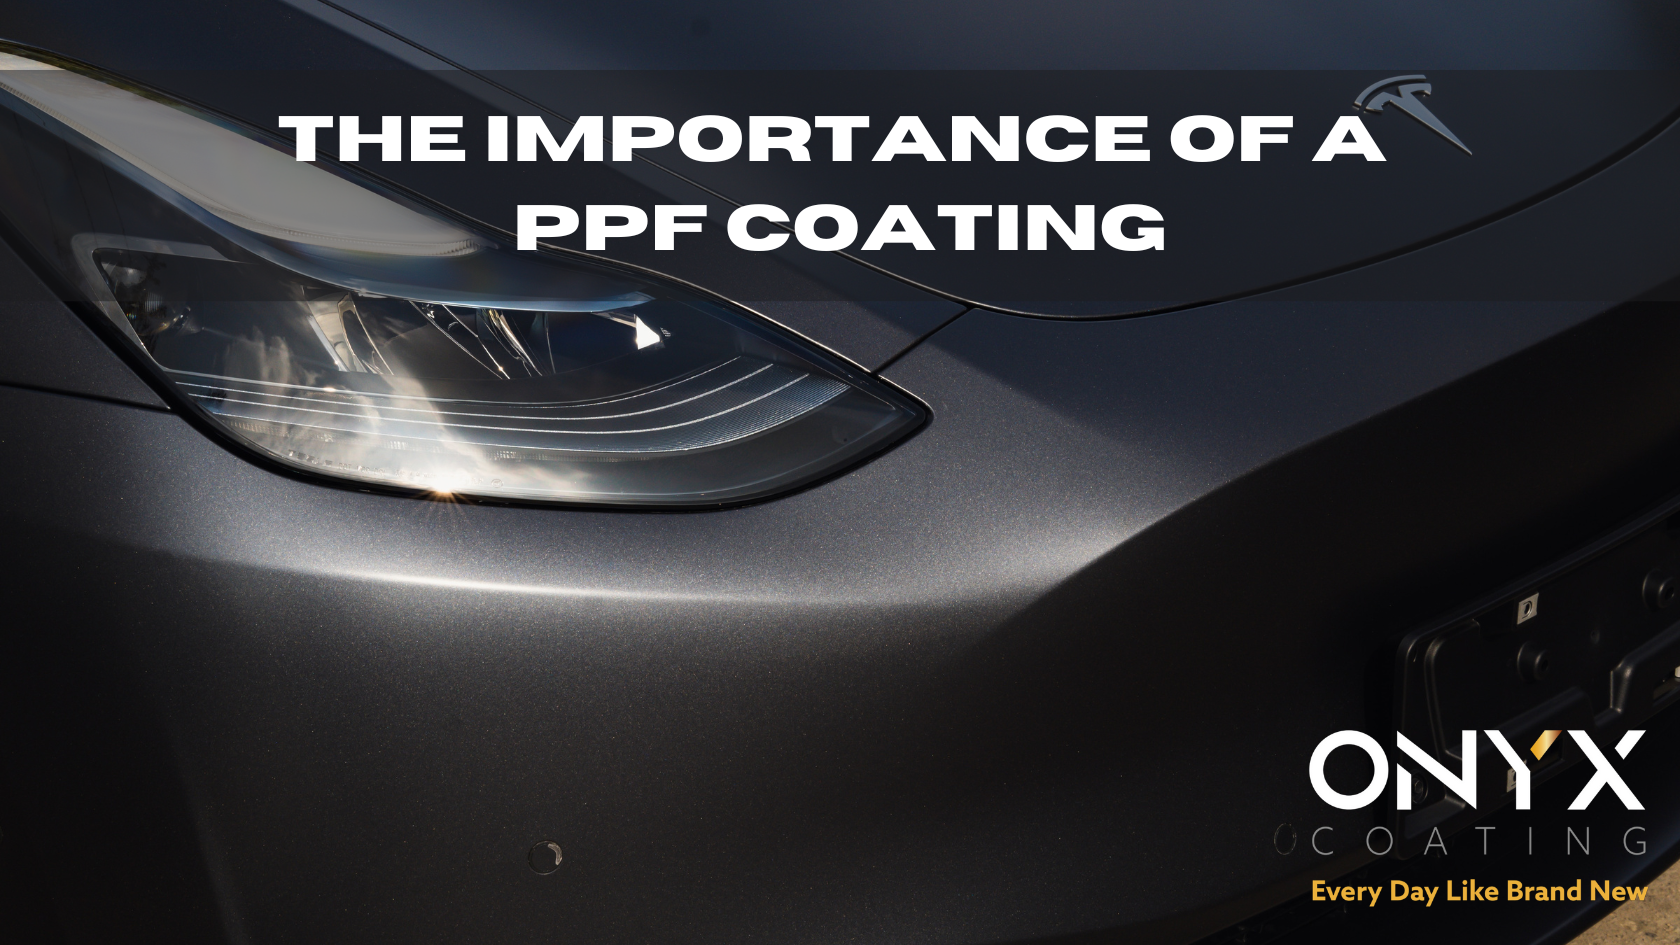 The Importance of PPF Coating